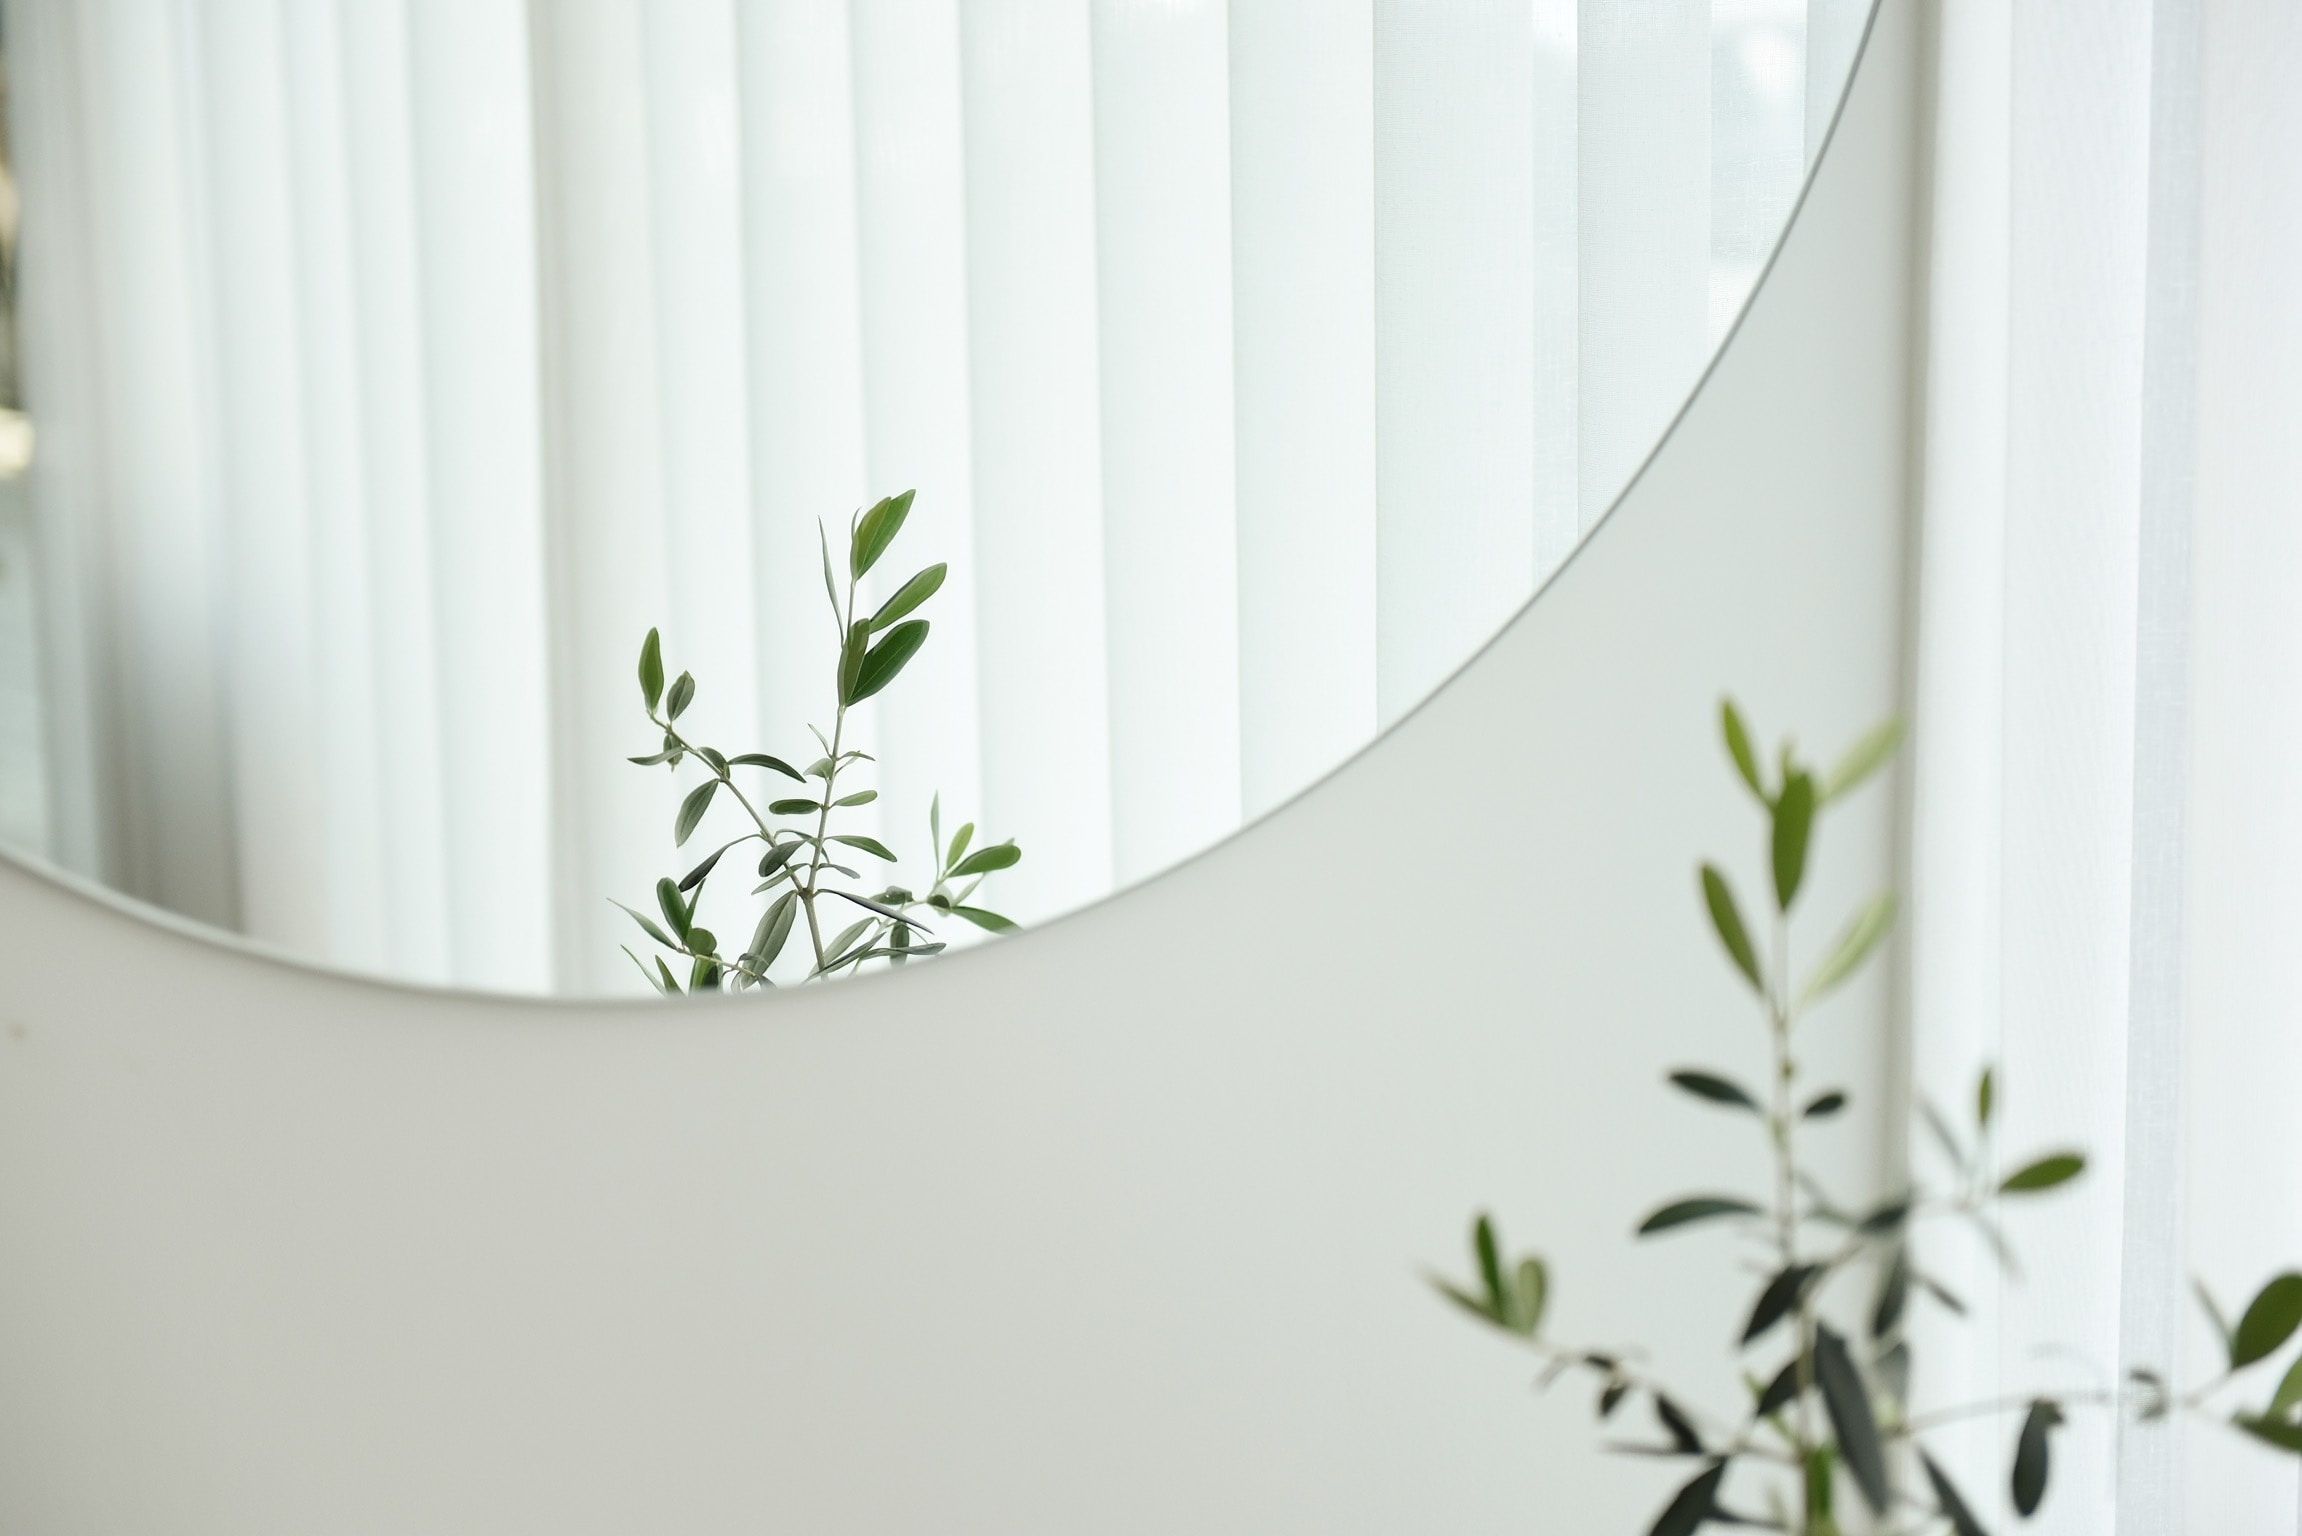 A round mirror mounted on the wall of an apartment bathed in sunlight, catching the reflection of a small indoor olive tree.